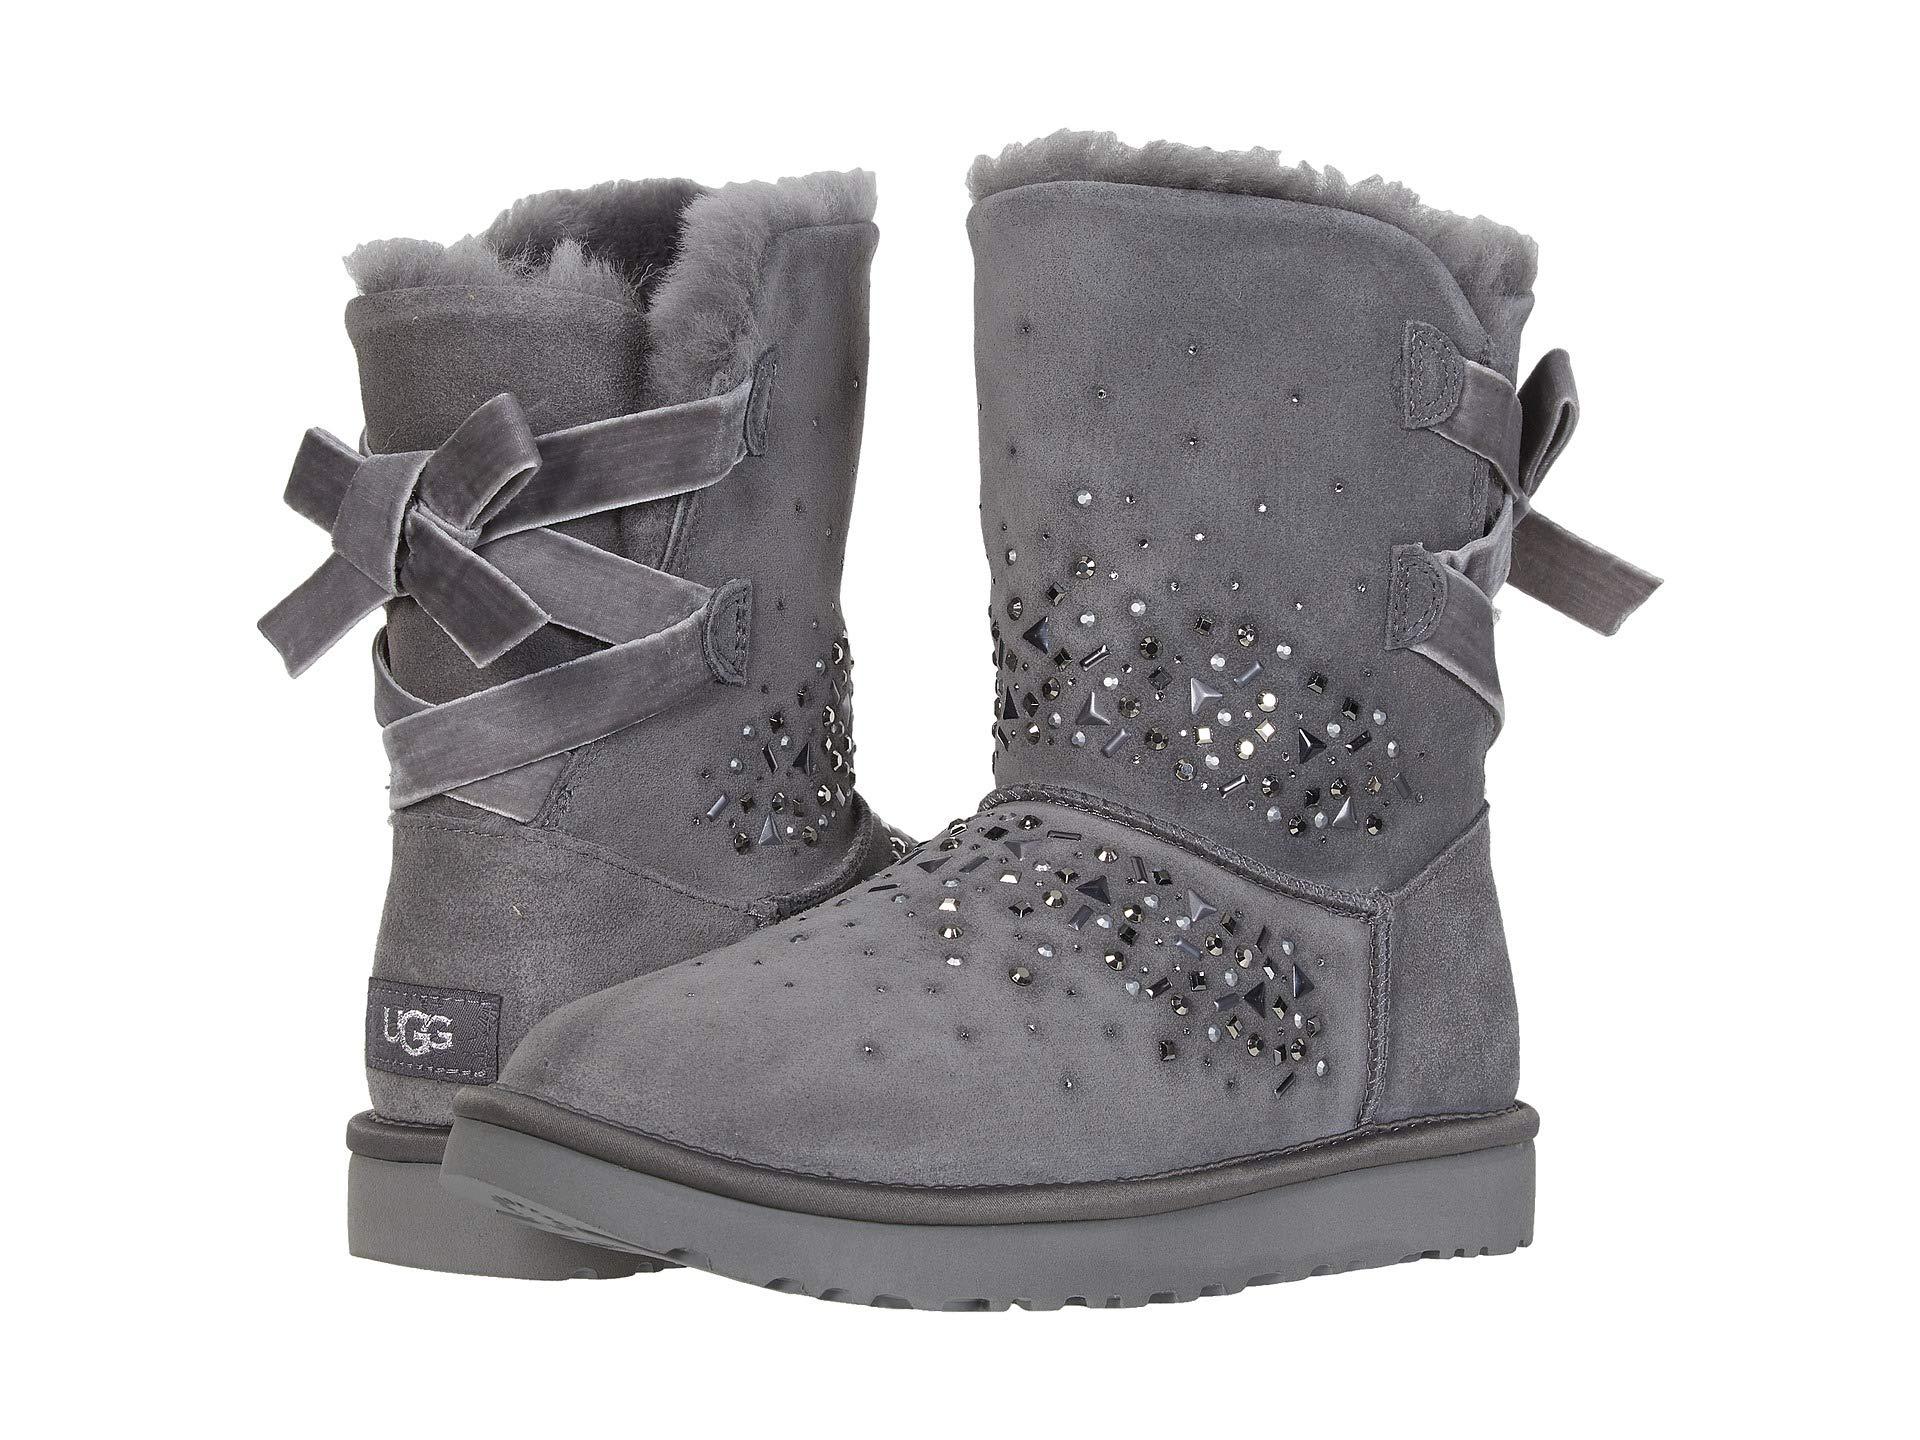 Ugg Classic Galaxy Bling Short United Kingdom, SAVE 37% - aveclumiere.com